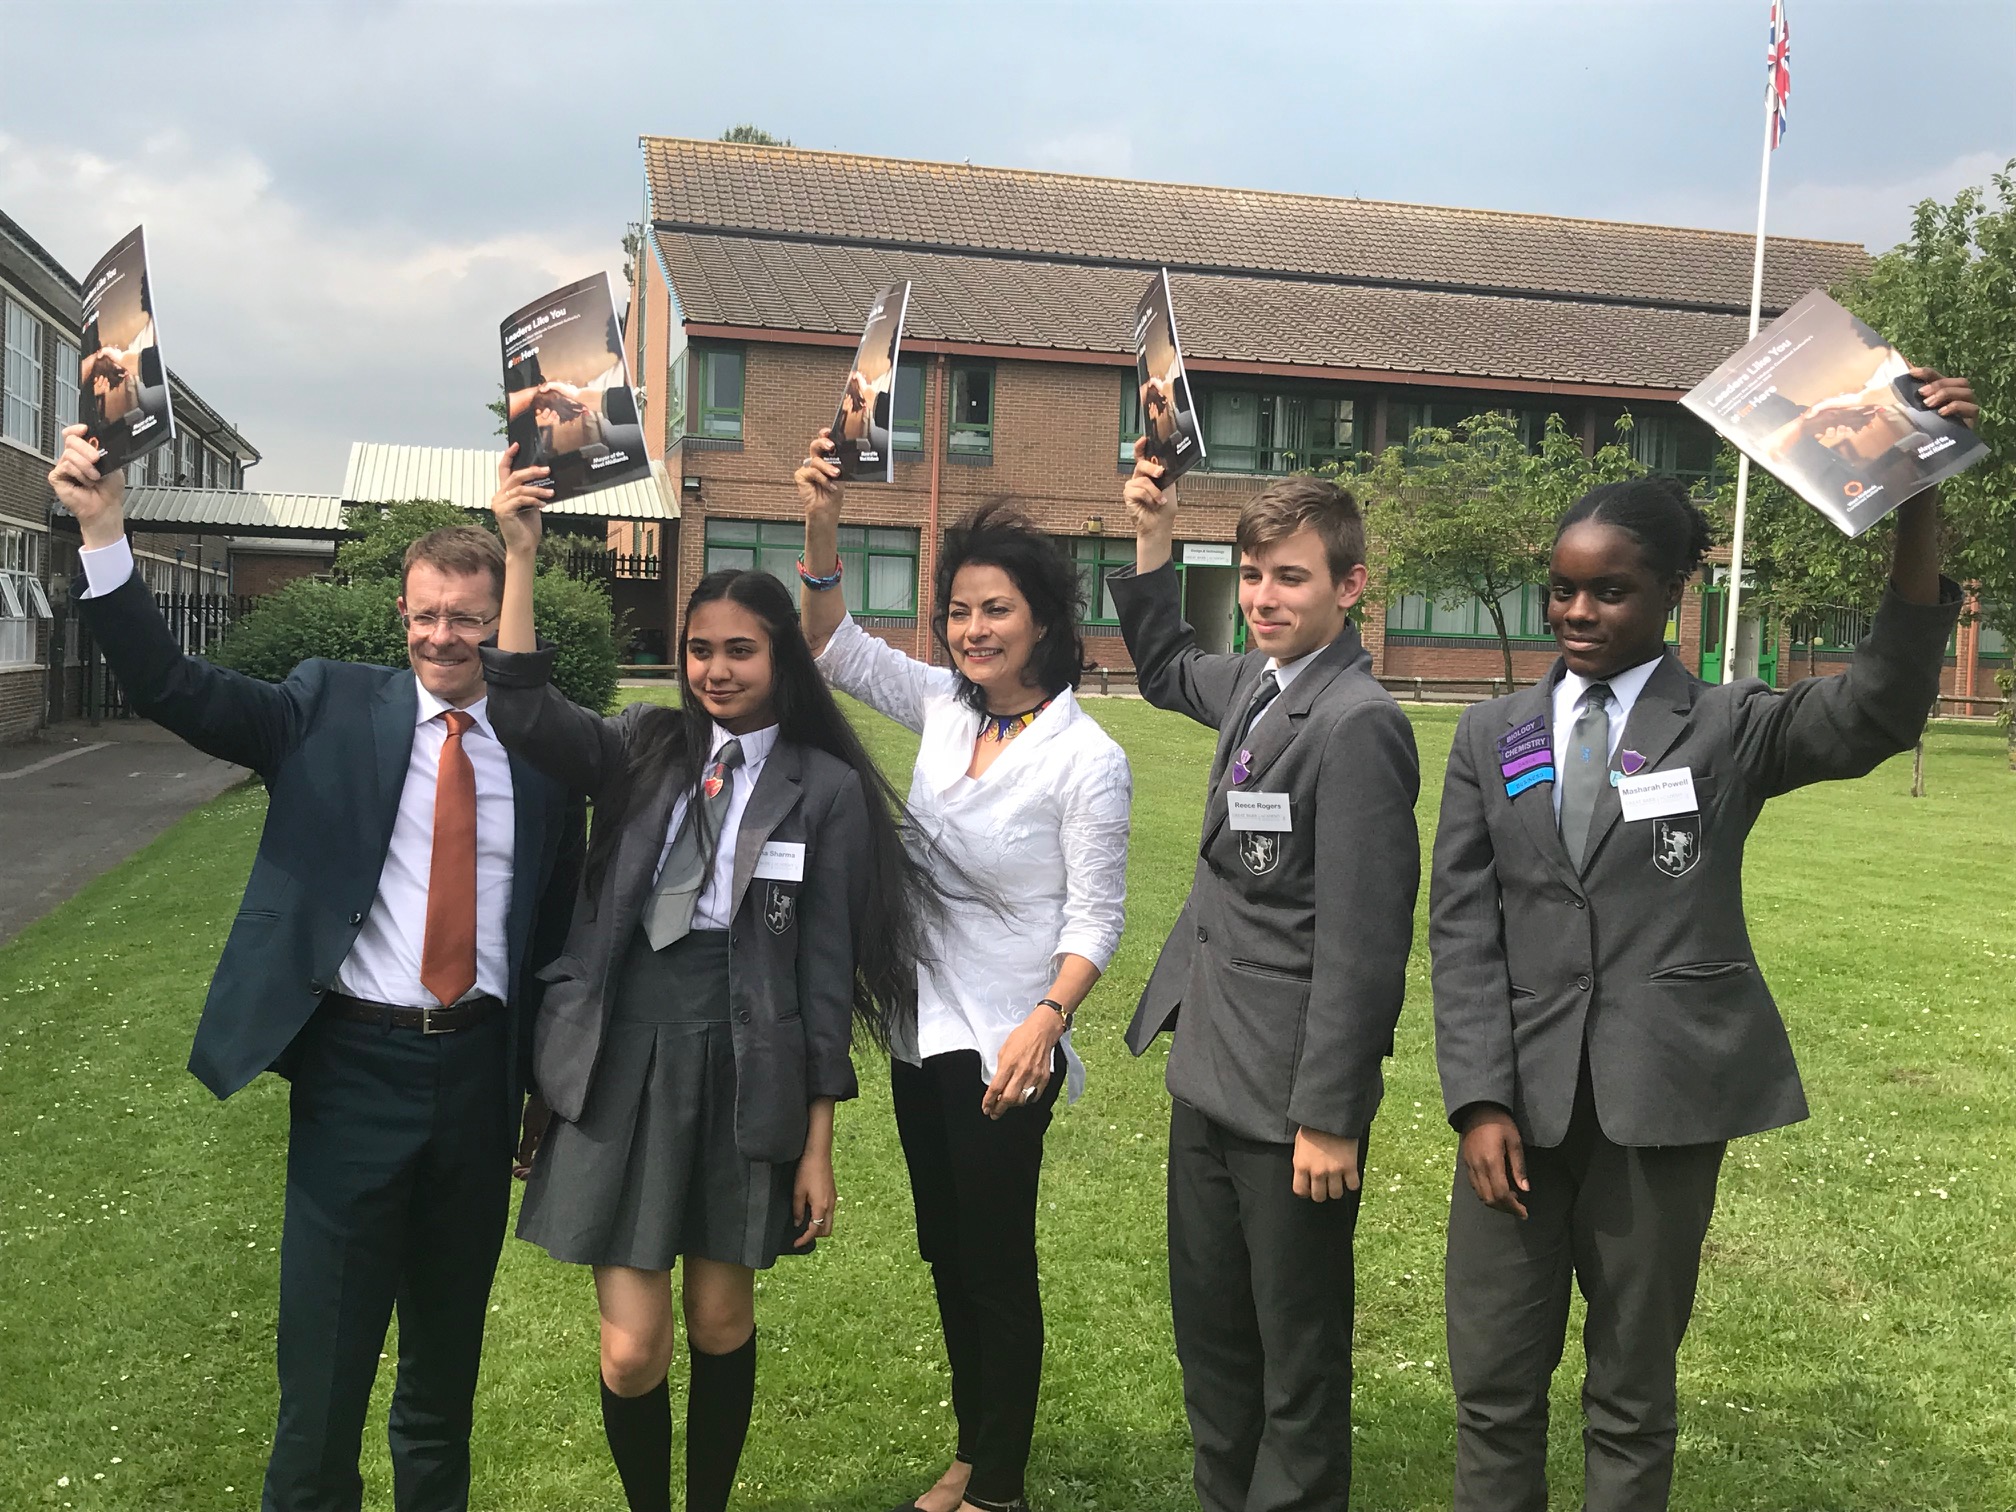 'Leaders Like You ' - Andy Street and Anita Bhalla launch the report at Great Barr Academy with pupils Tisha Sharma, left, Reece Rogers and Mashara Powell.